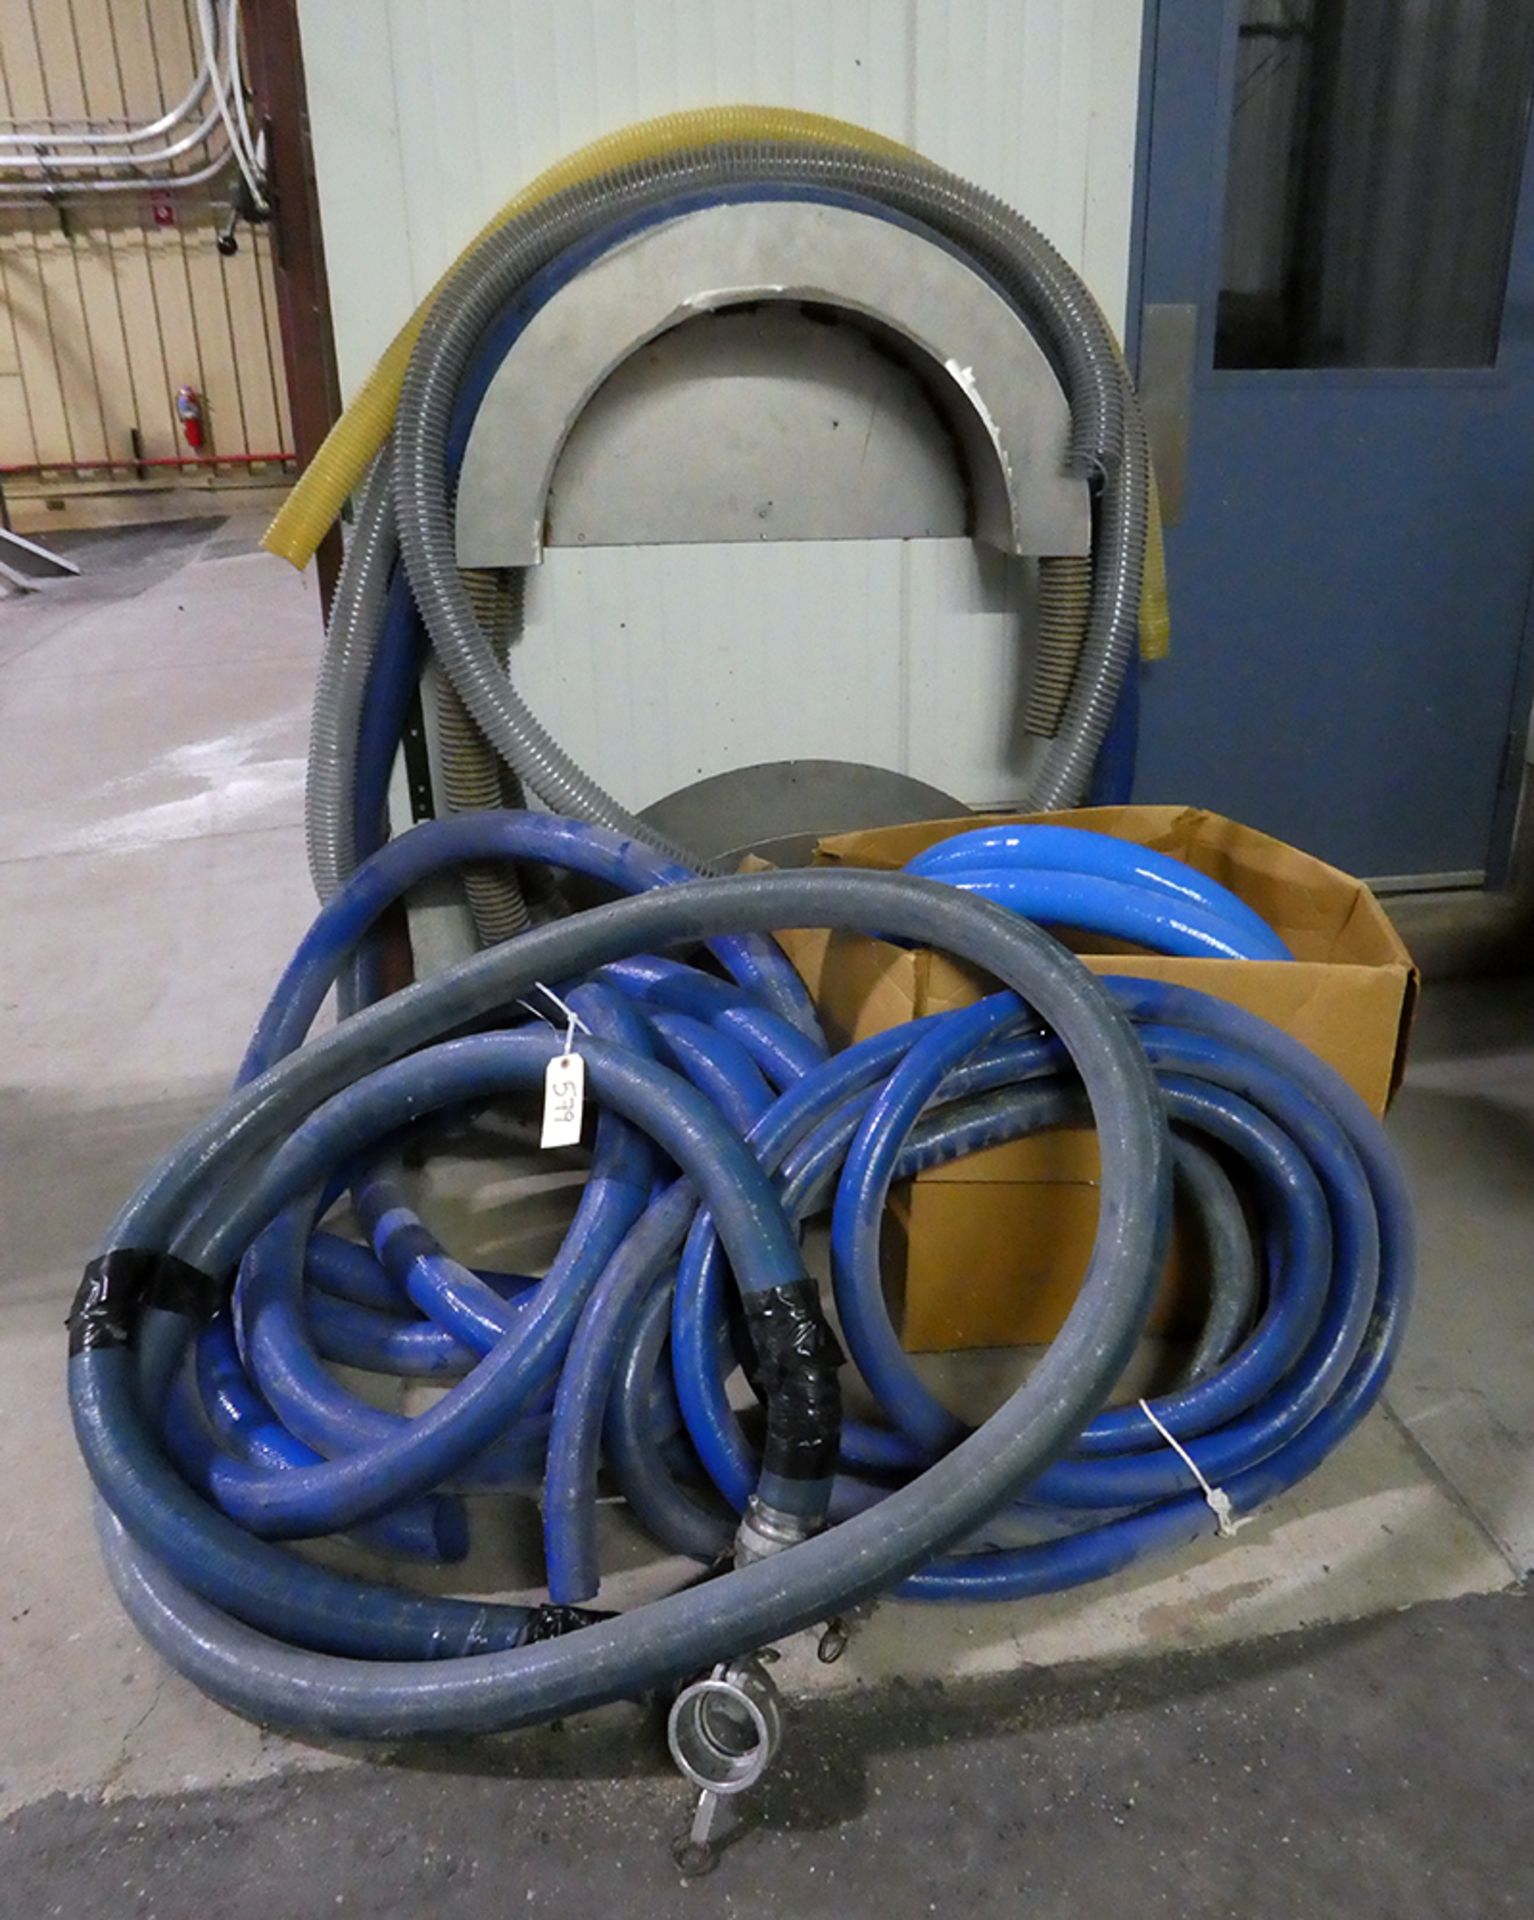 Assorted Flexible Hose and Tubing